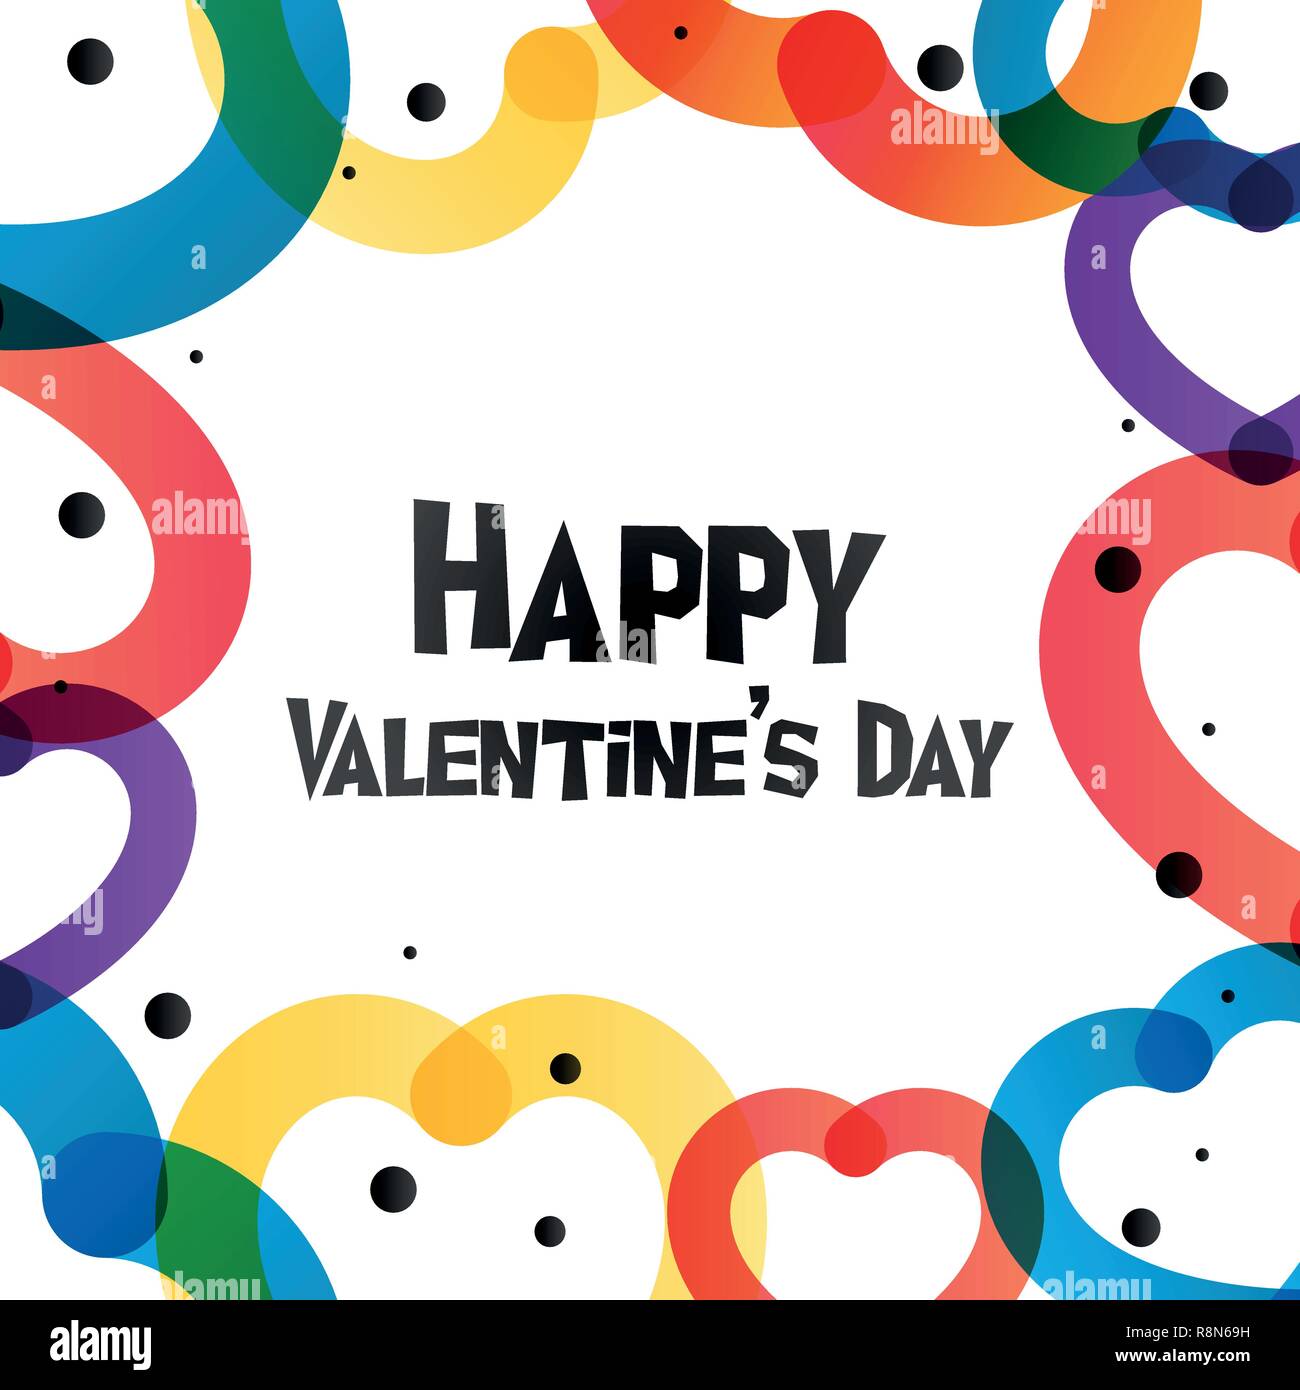 Happy Valentine Day instagram card in 2019 graphic trend, color